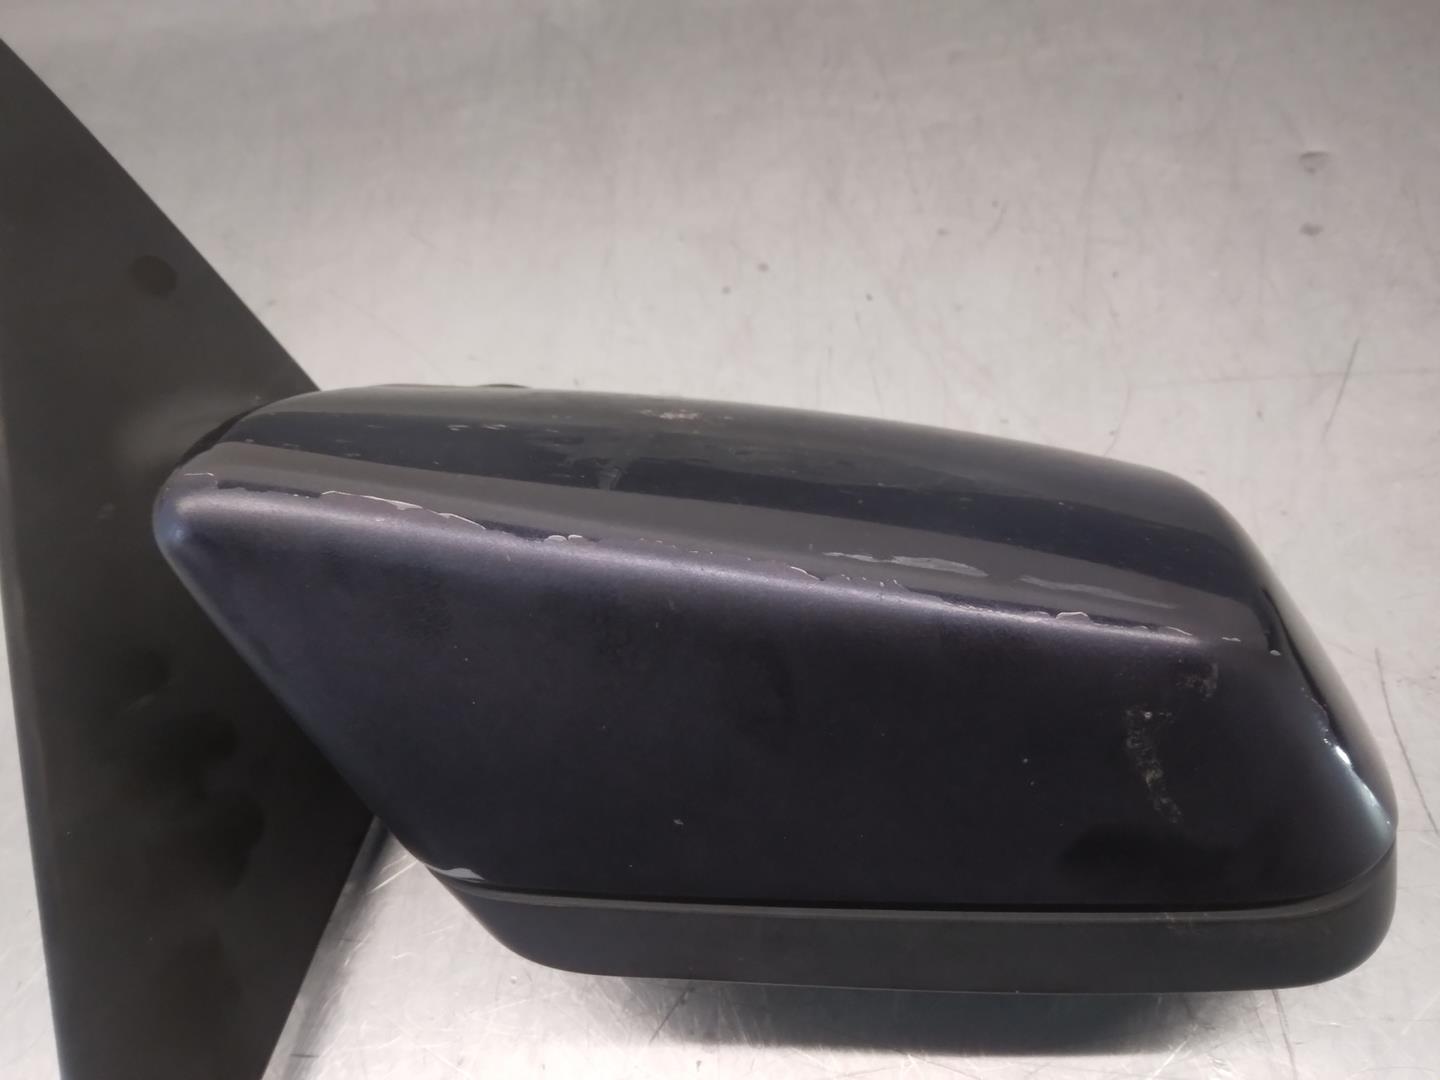 BMW 3 Series E46 (1997-2006) Right Side Wing Mirror 51168245128, 5PINES, 4PUERTAS 21727391